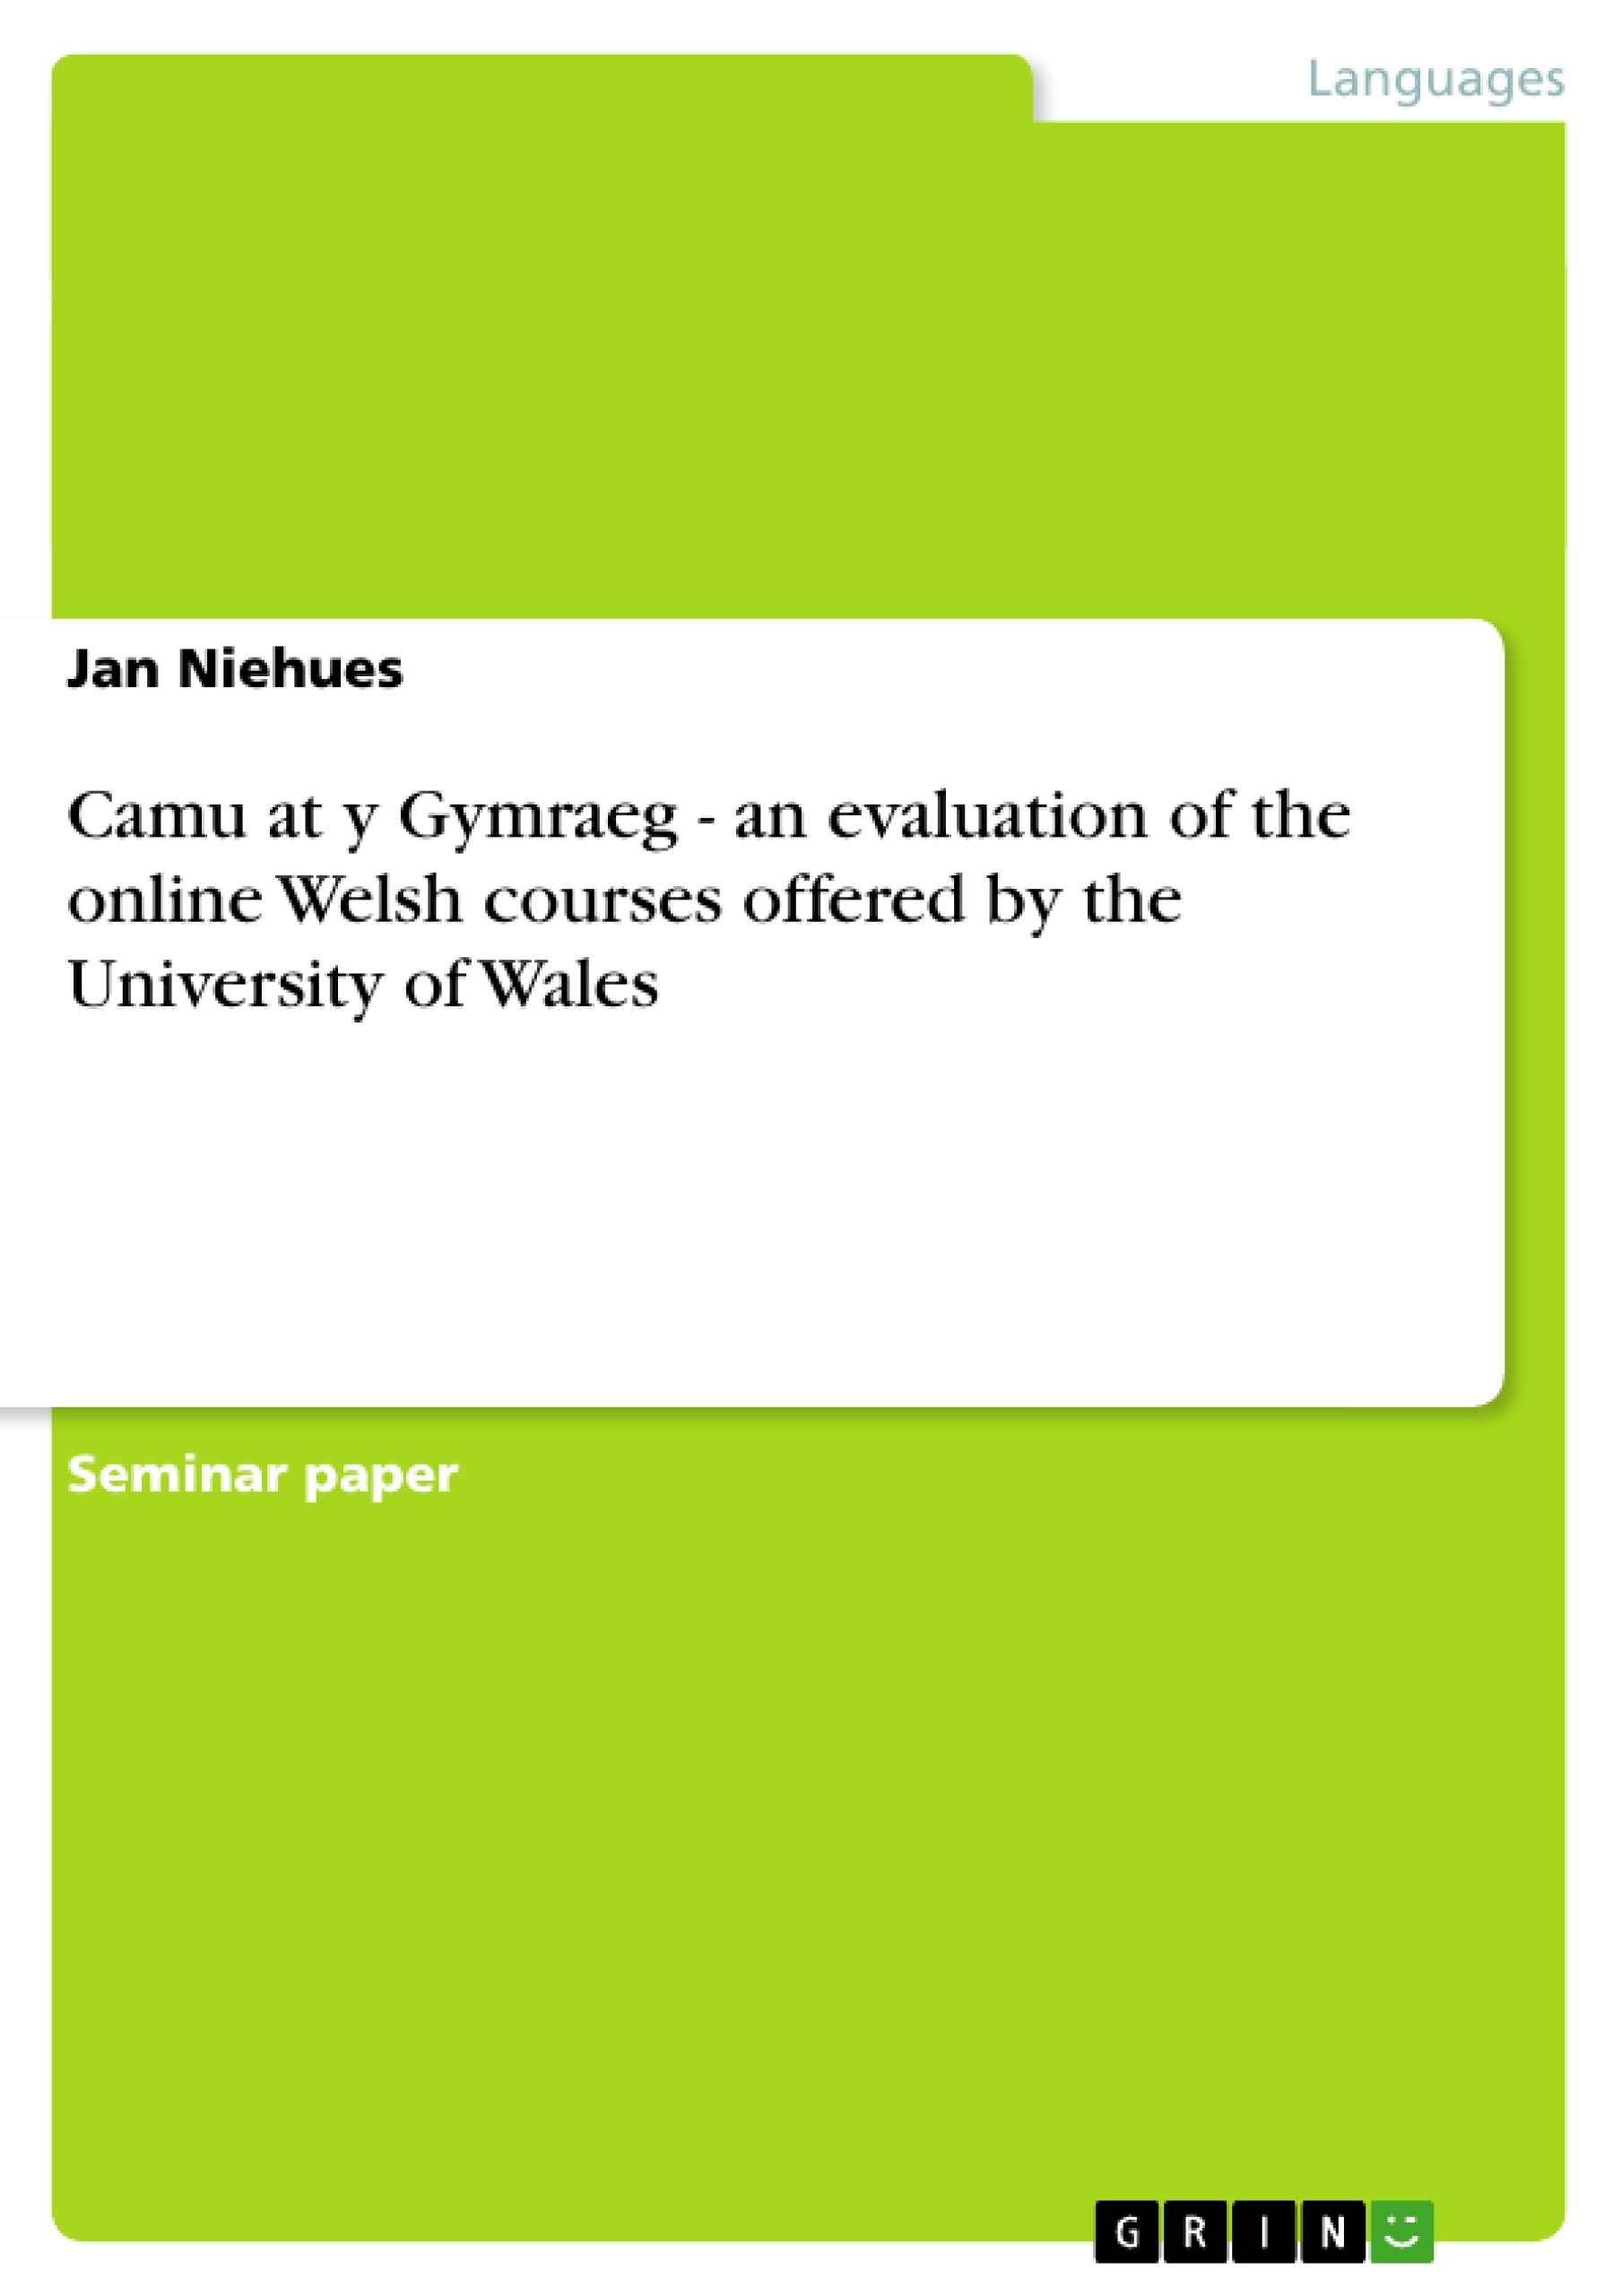 Title: Camu at y Gymraeg - an evaluation of the online Welsh courses offered by the University of Wales